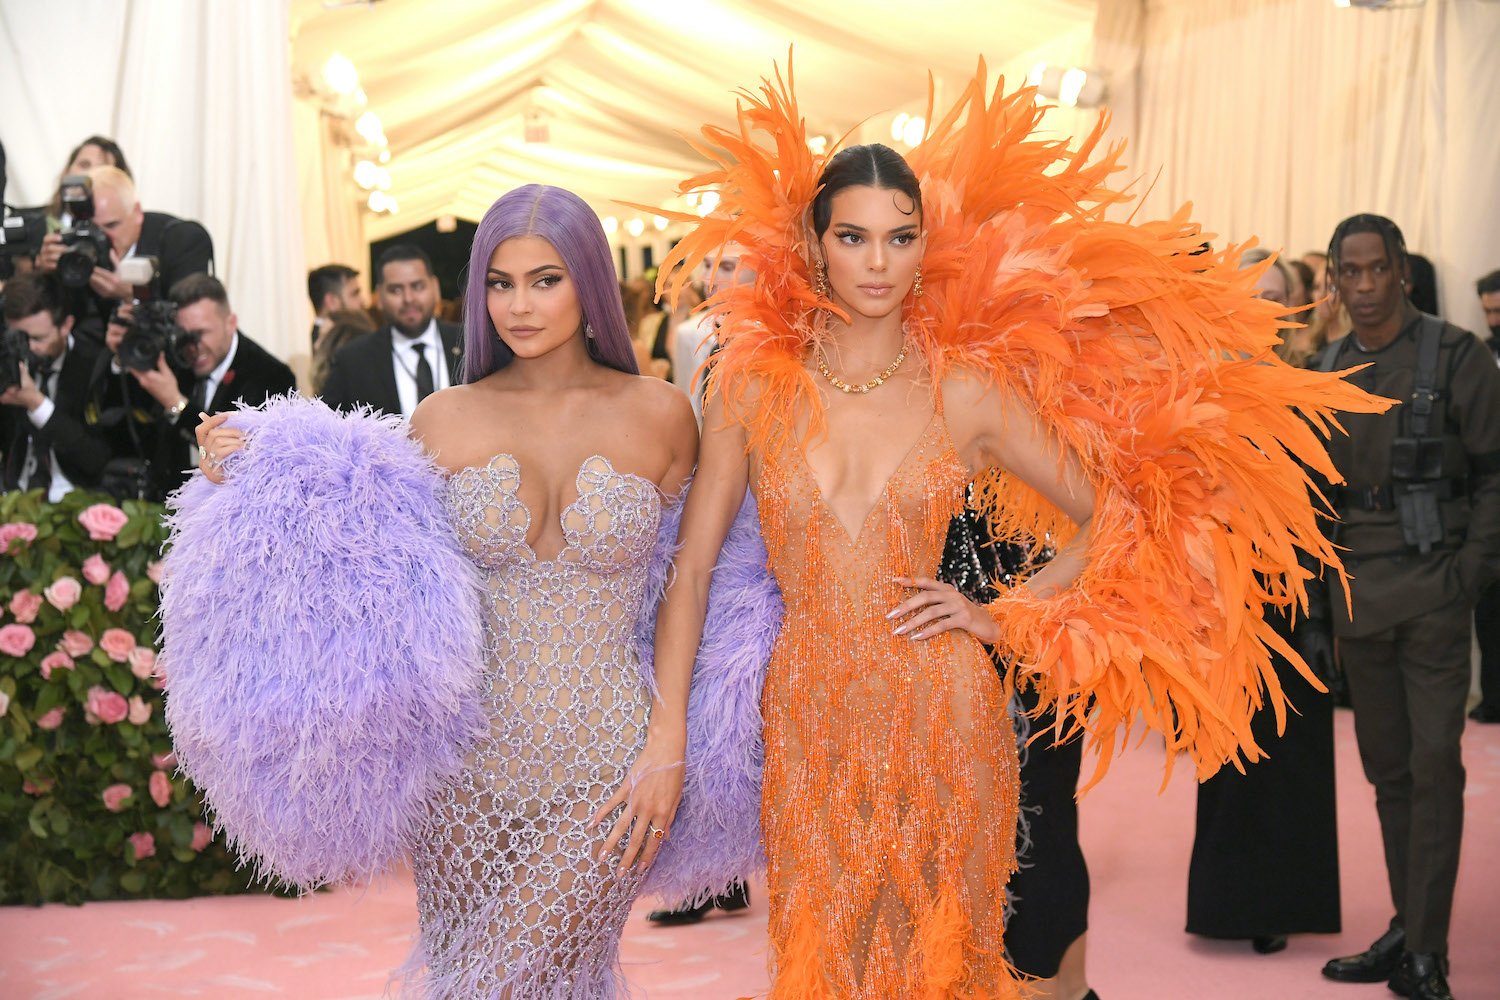 Kylie Jenner and Kendall Jenner attend the 2019 Met Gala Celebrating Camp: Notes on Fashion